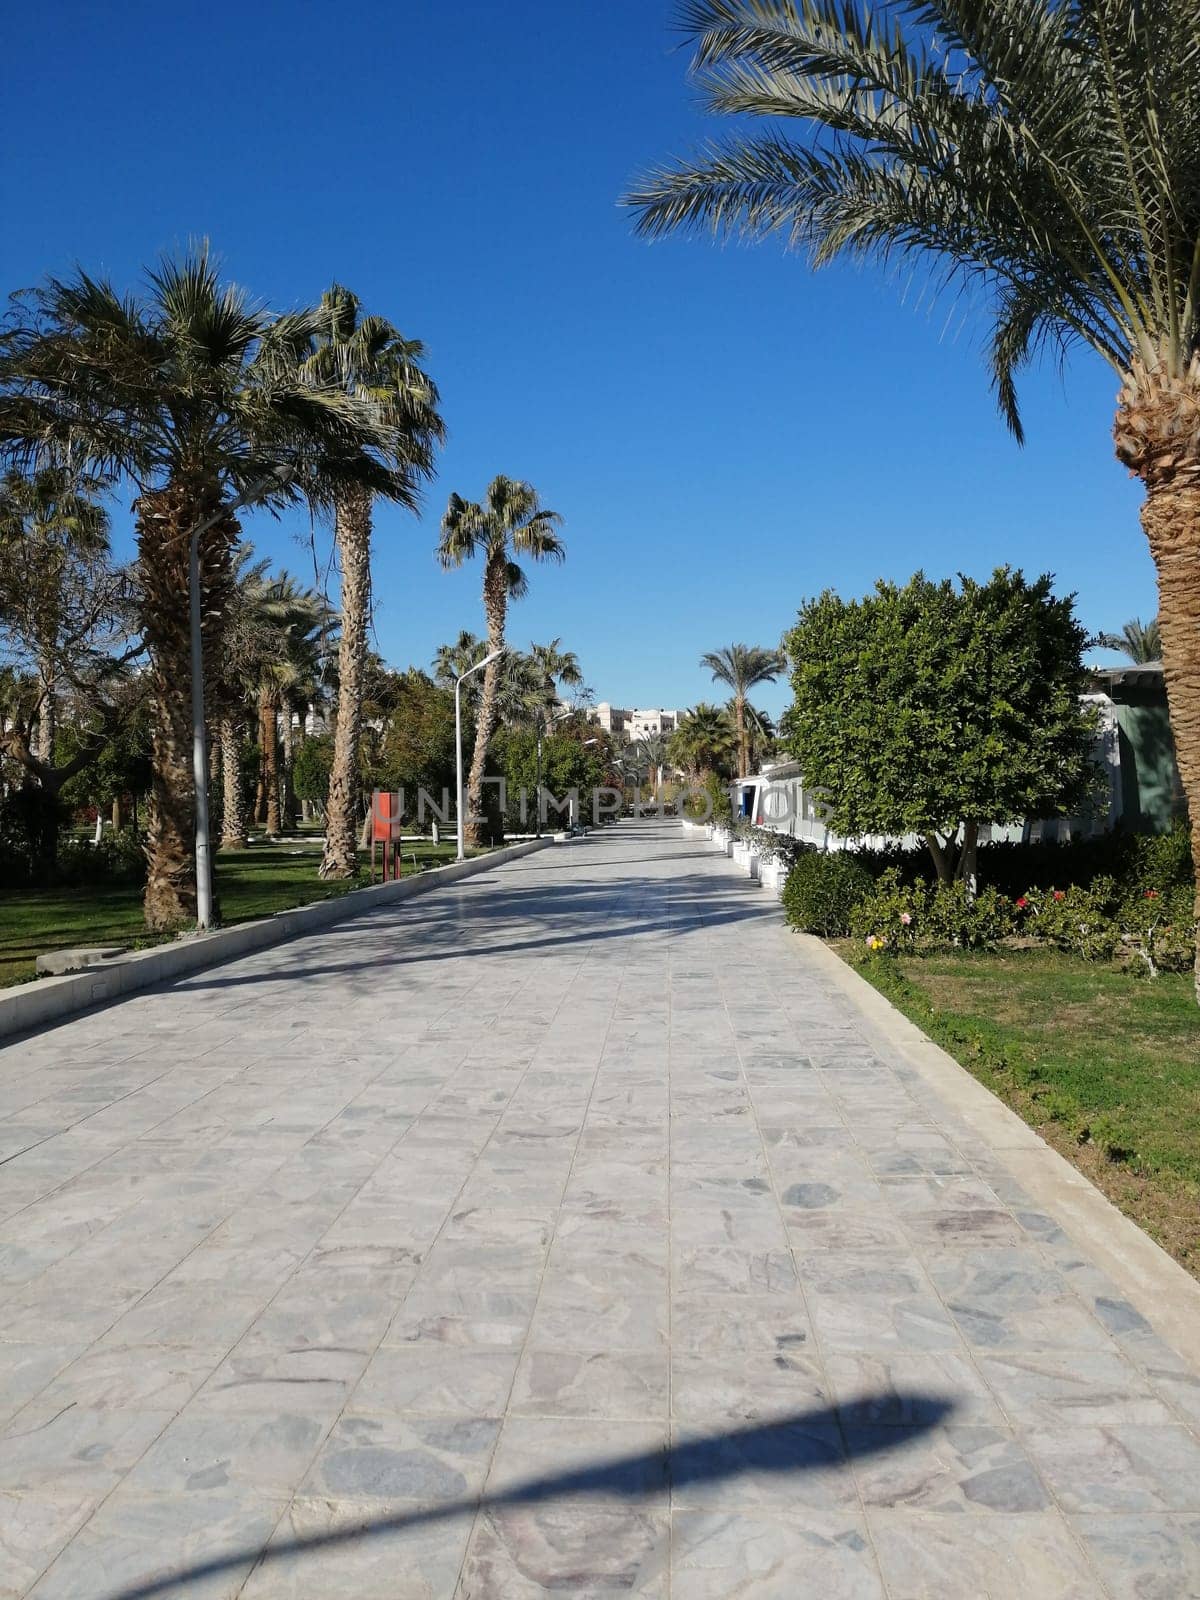 The view of palm trees and beautiful architecture on the territory of the castle in Egypt is the concept of a luxury trip. Rest on the territory of the hotel